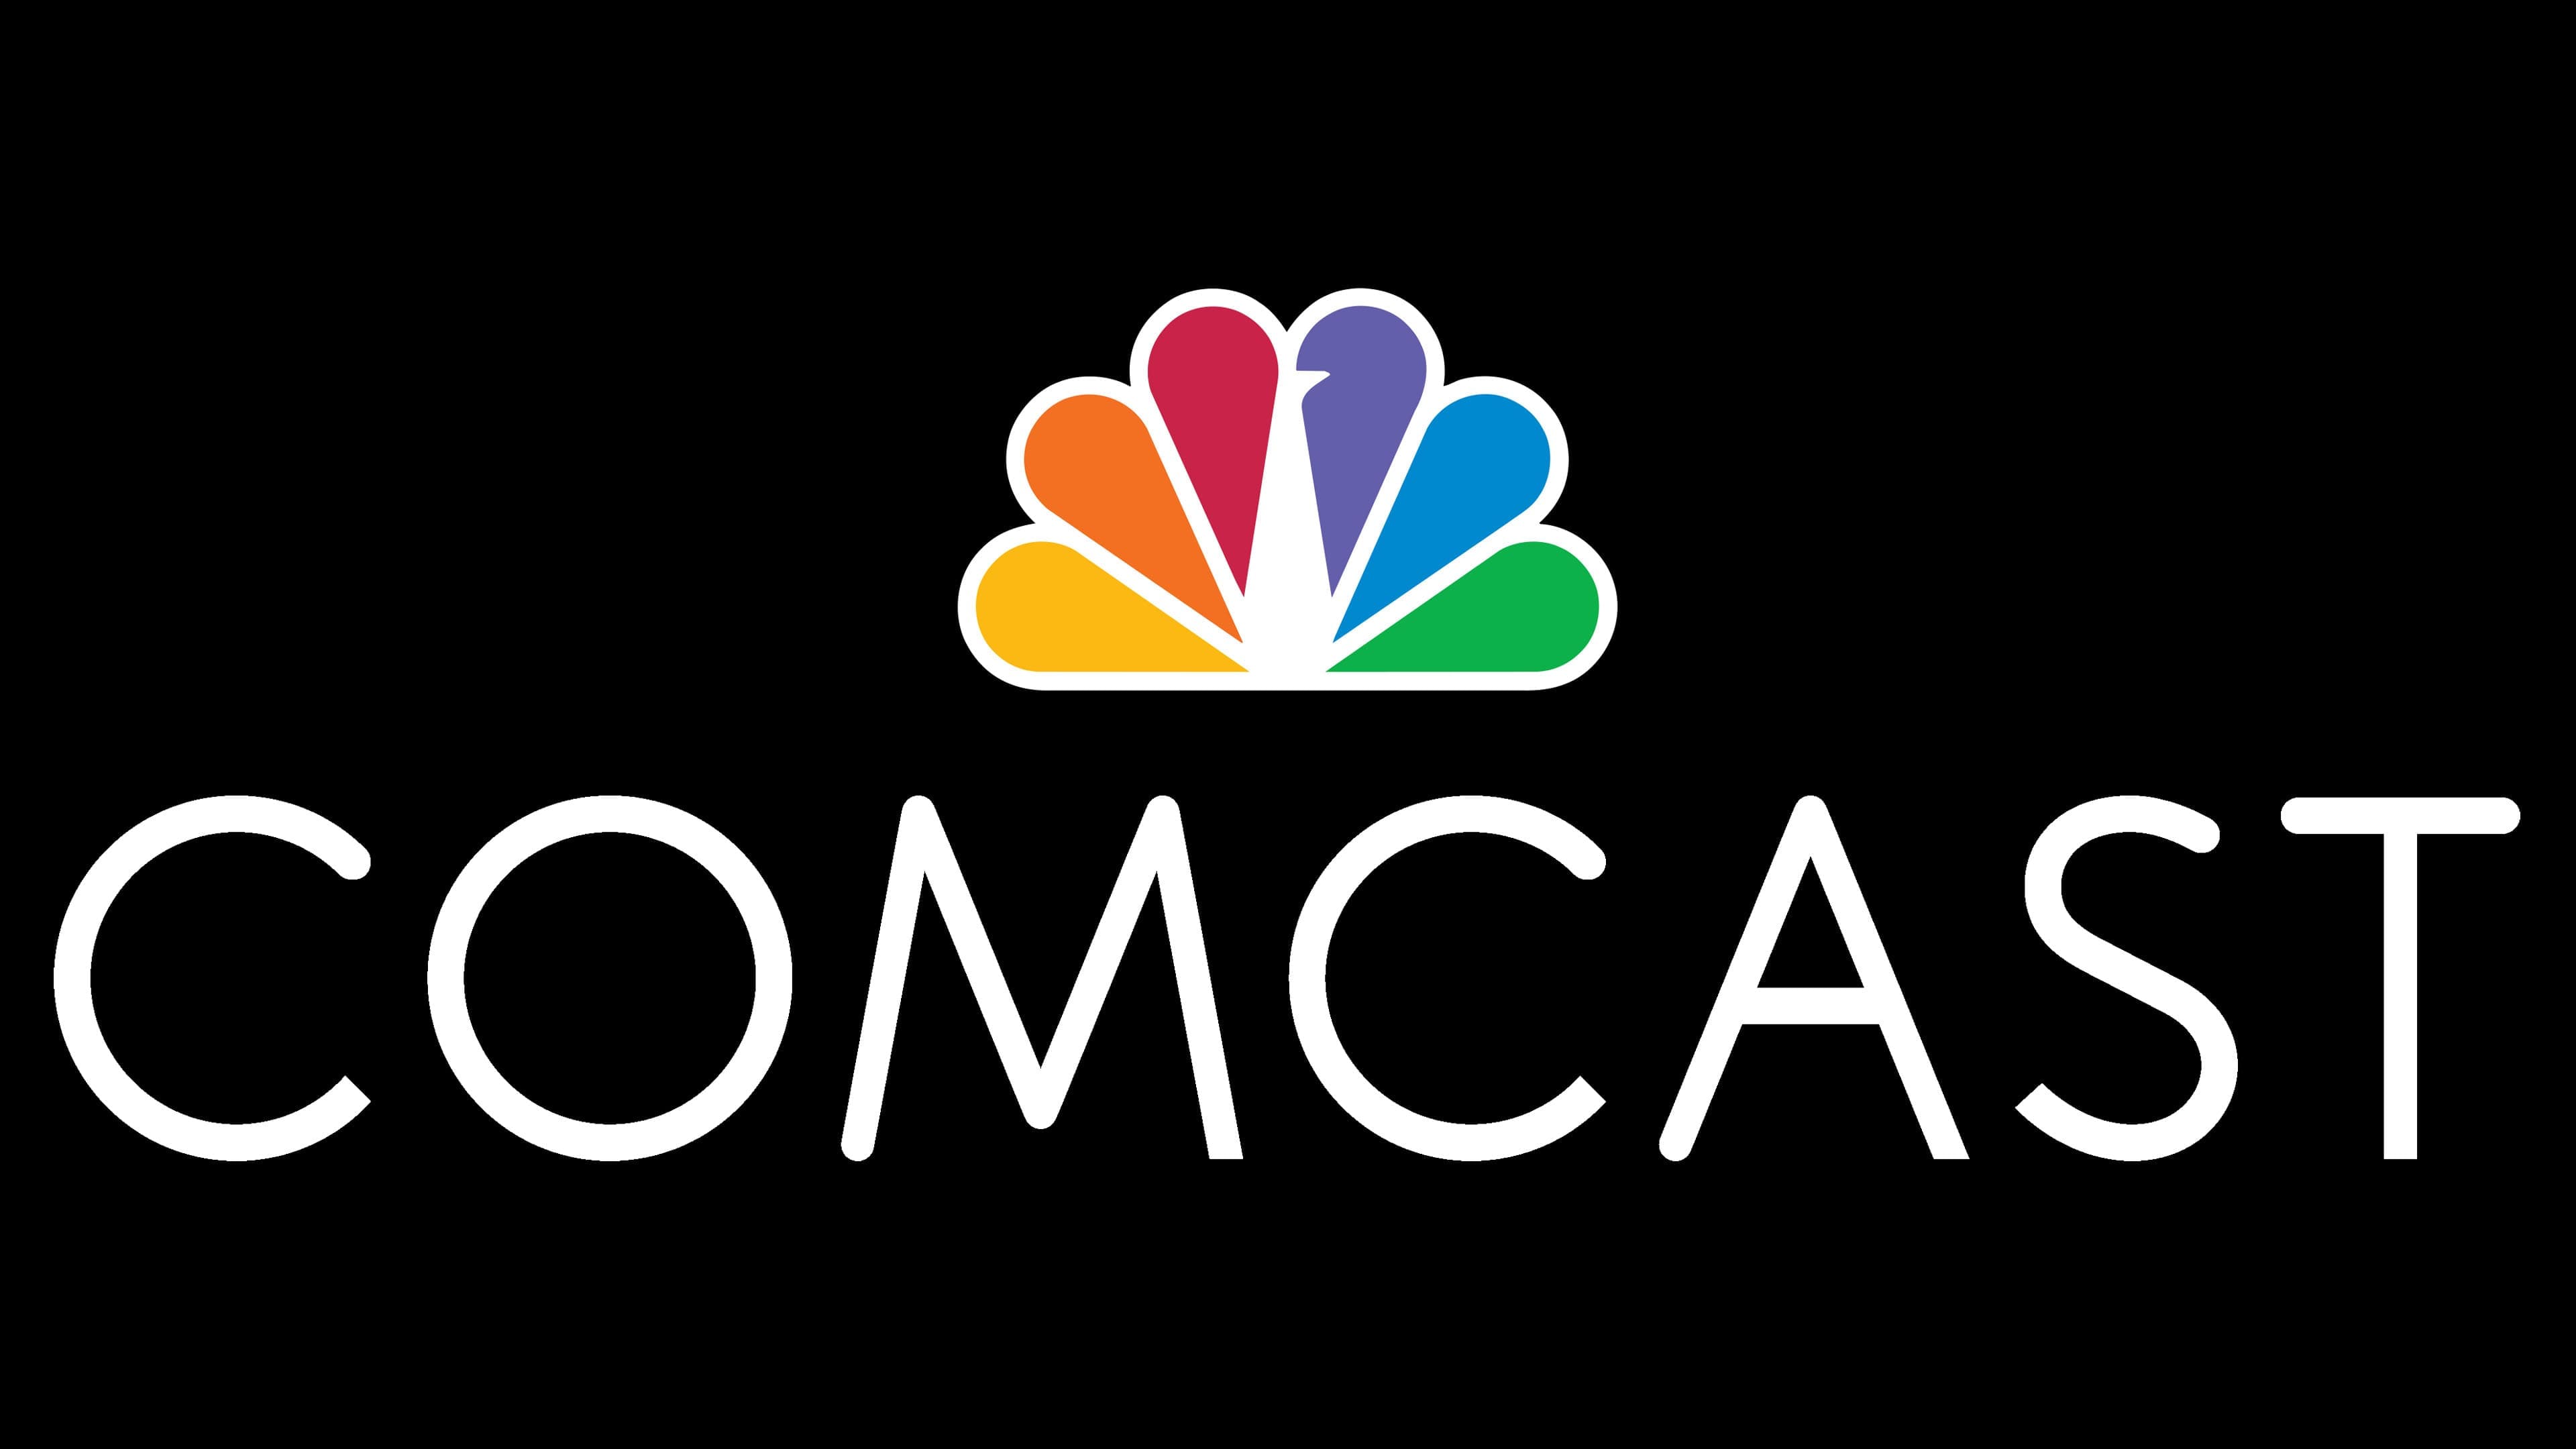 comcast logo, symbol, meaning, history, png, brand